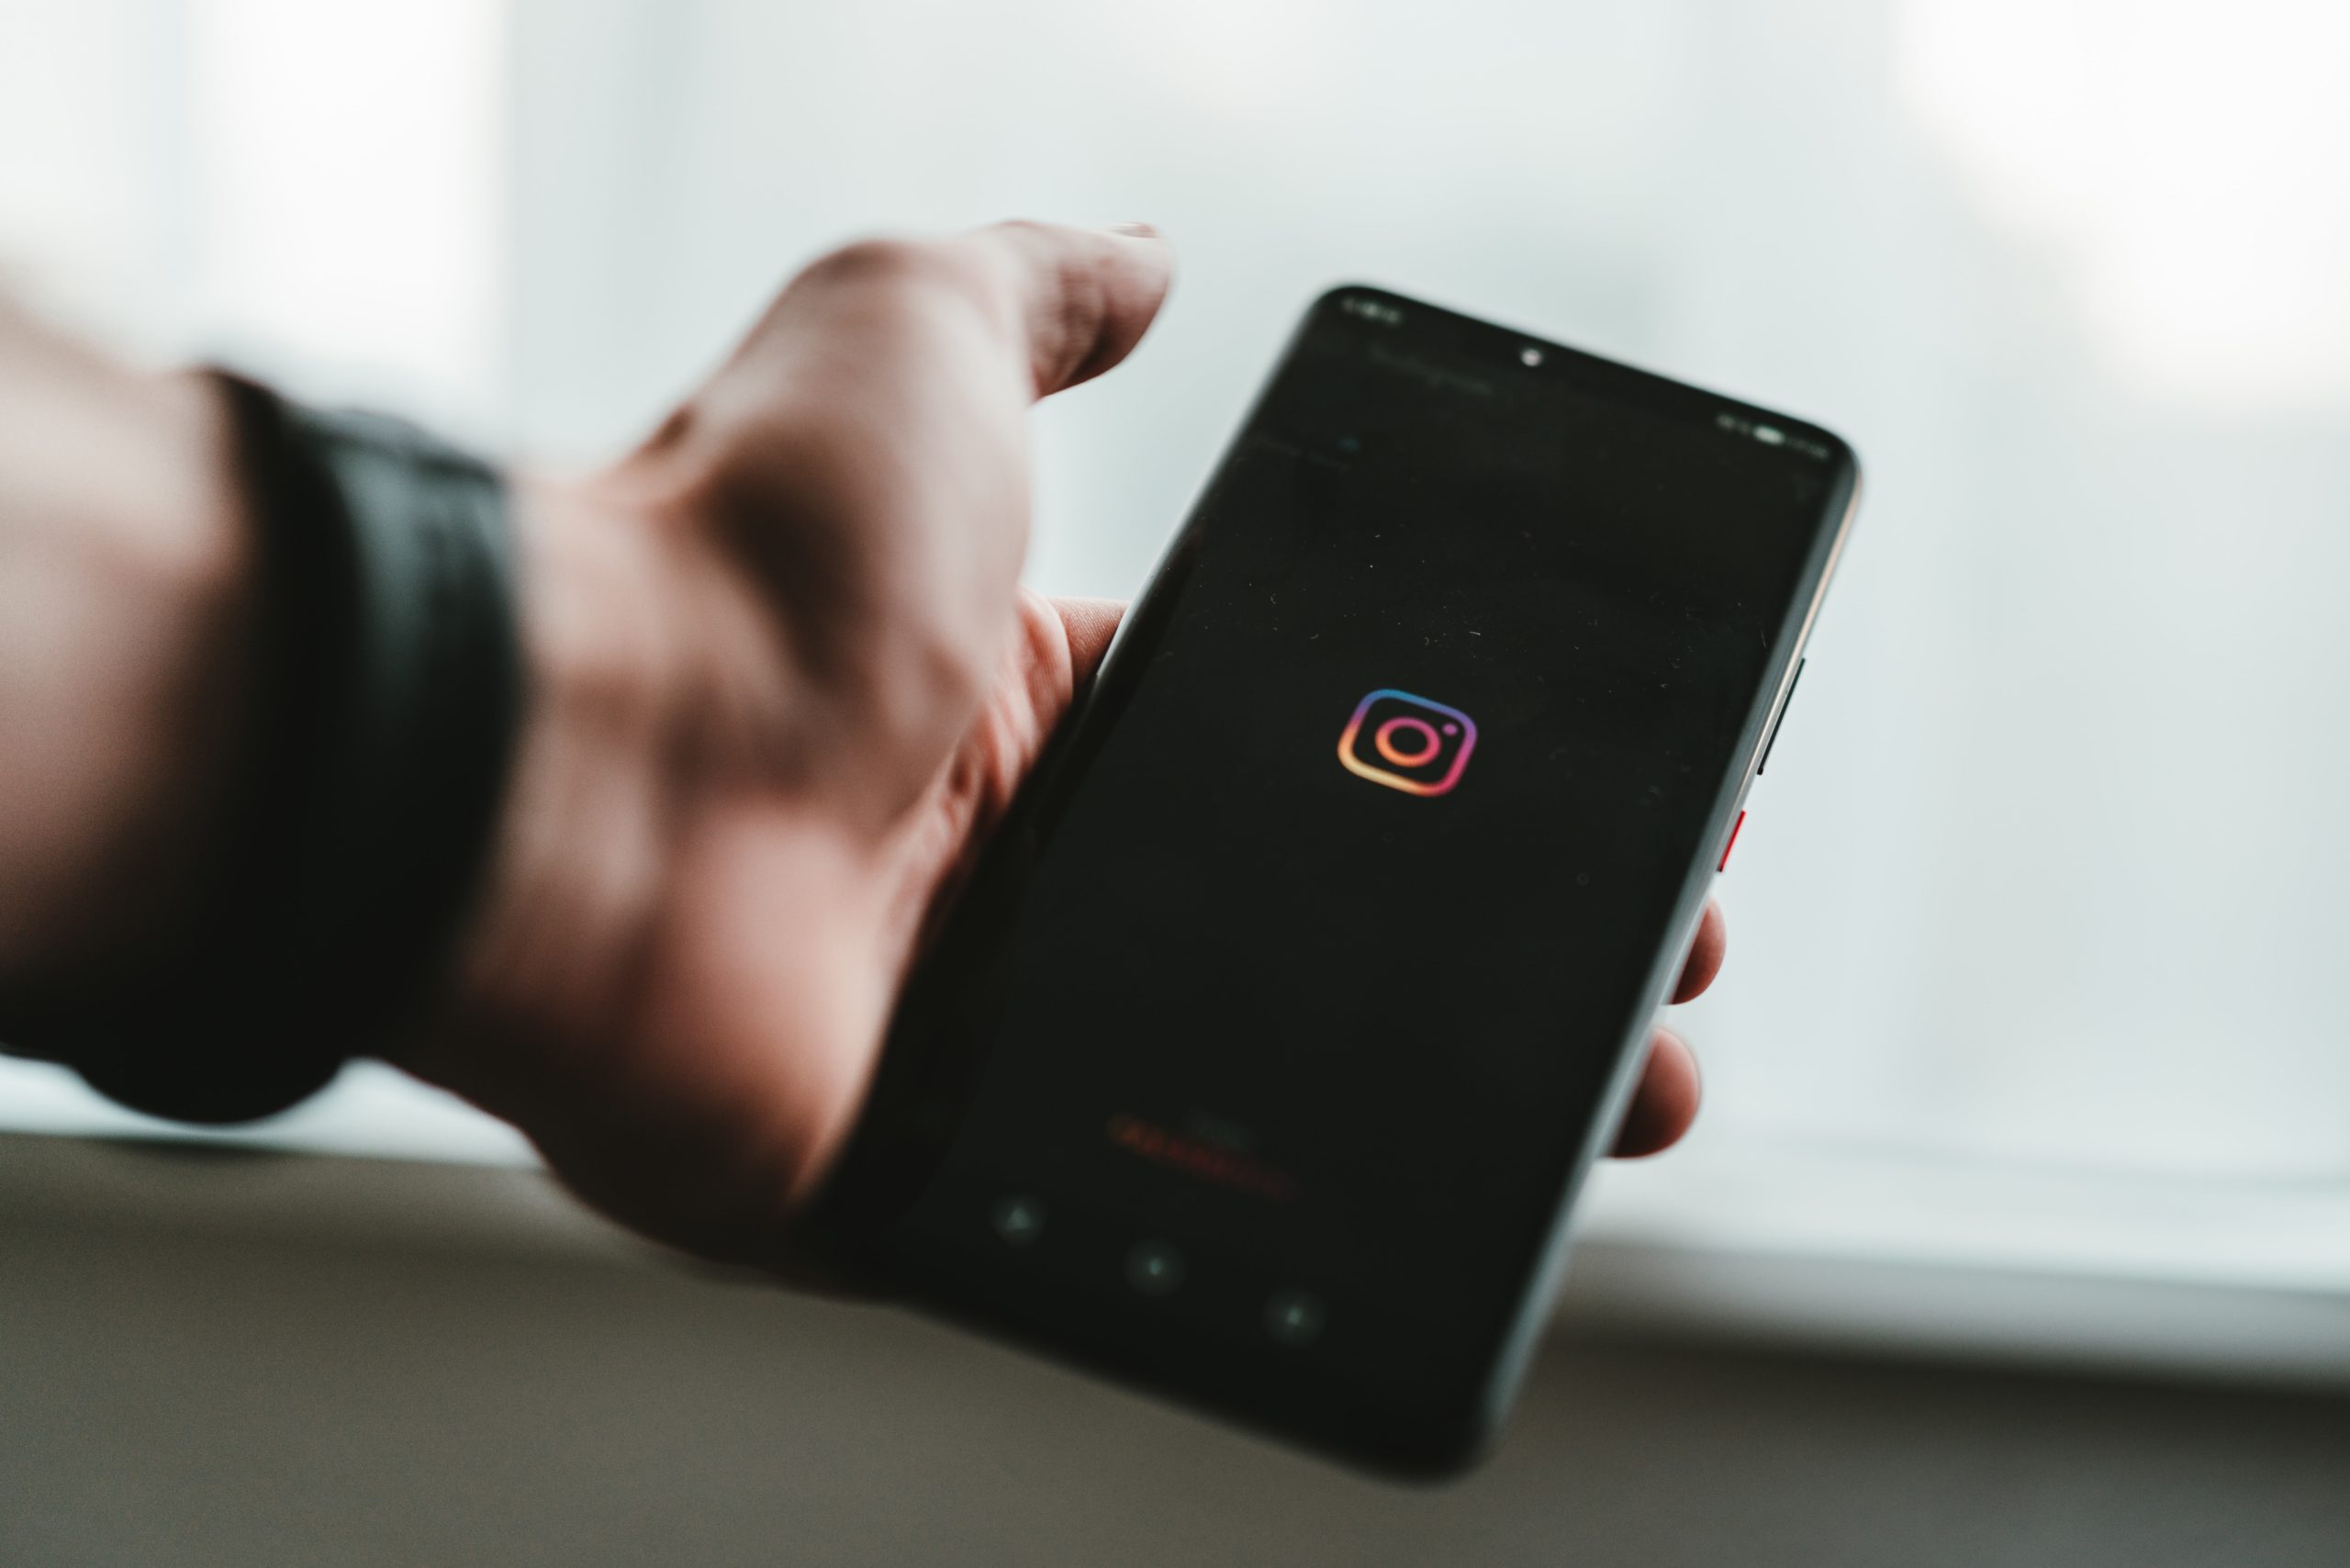 6 Key Elements of an Instagram Business Profile